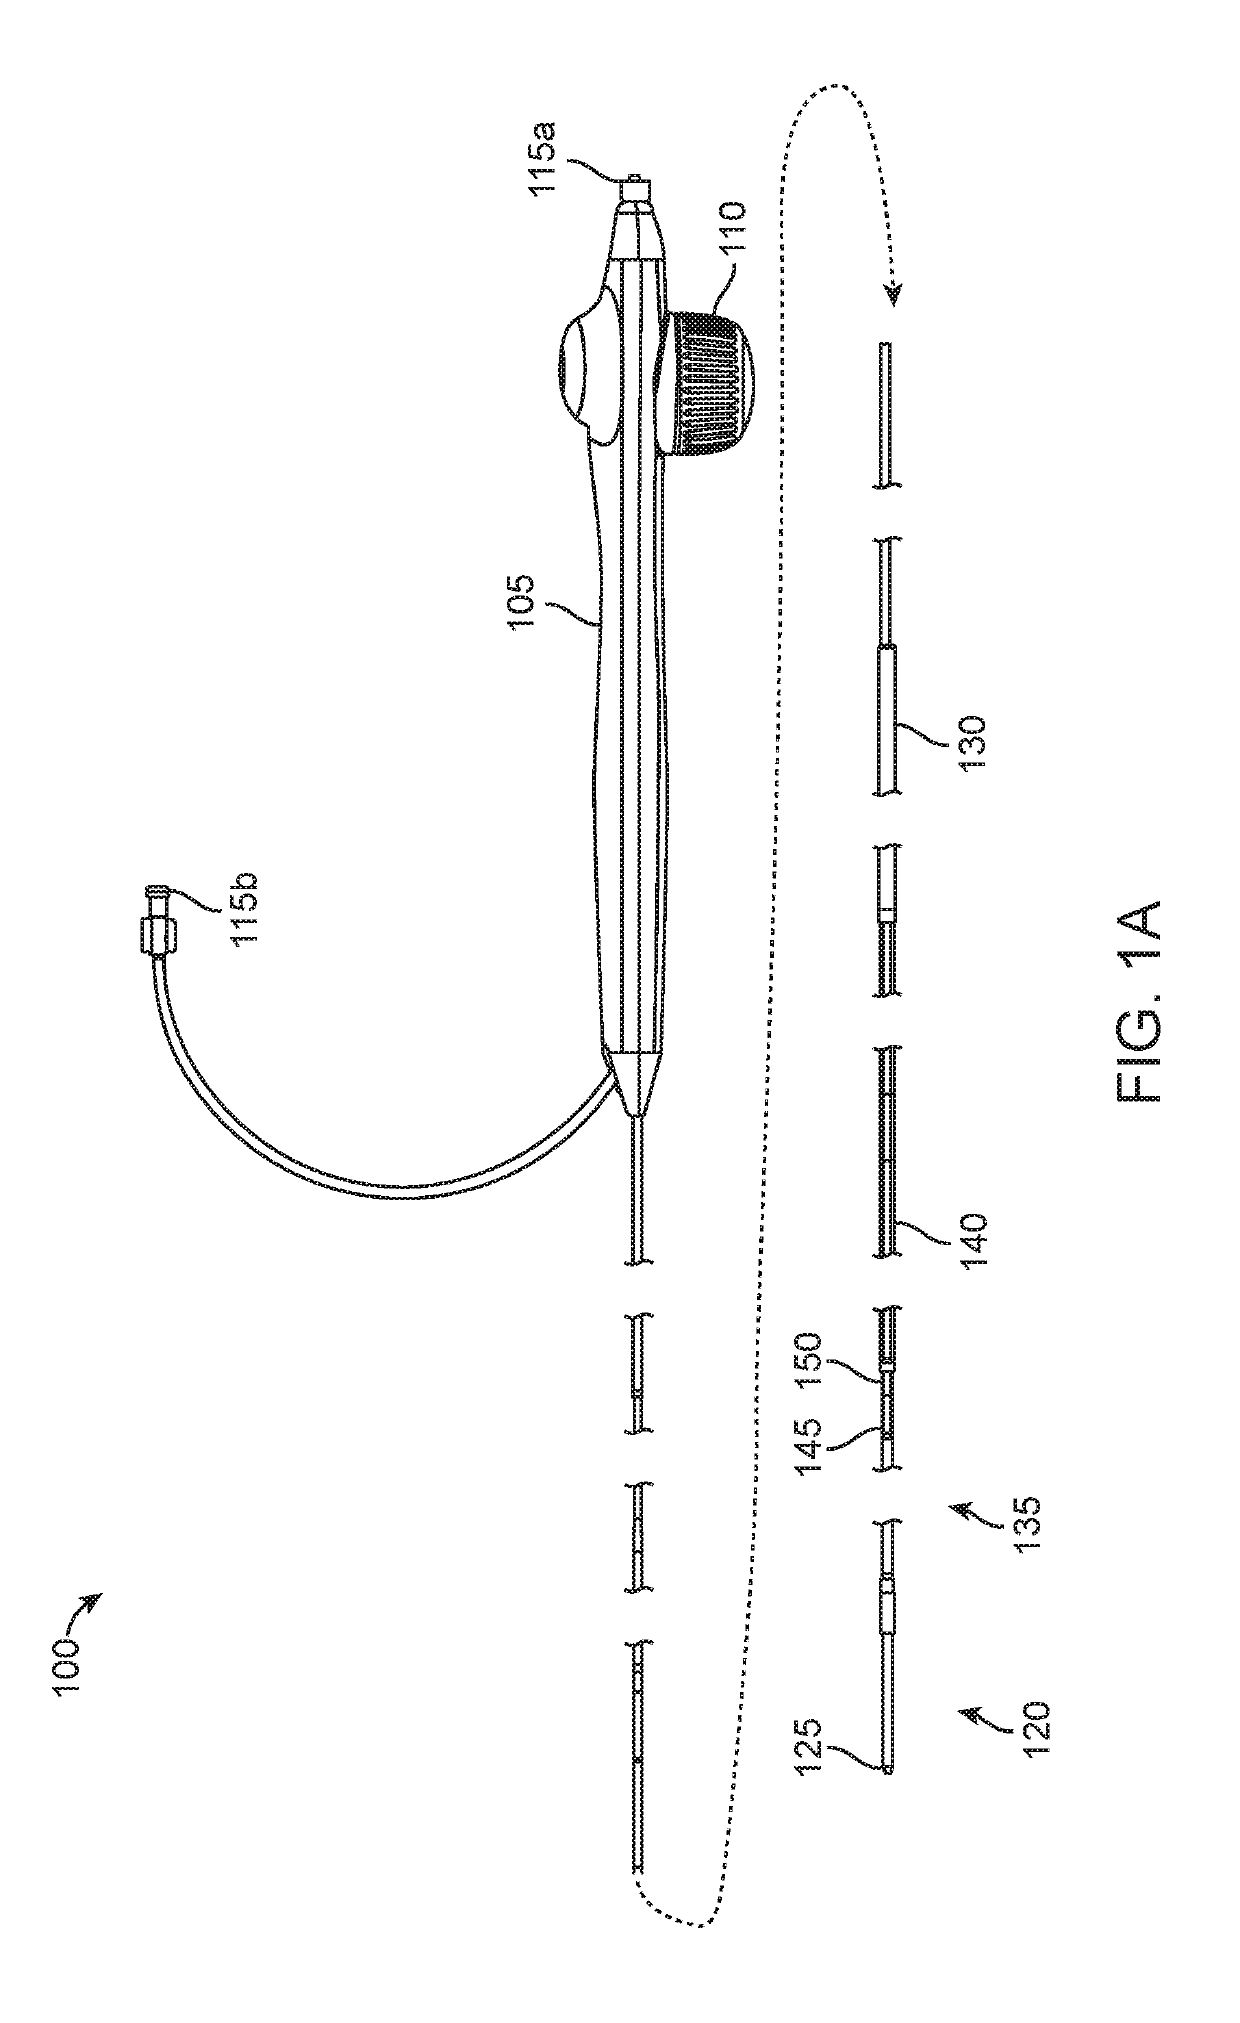 Systems and methods for delivering stent grafts